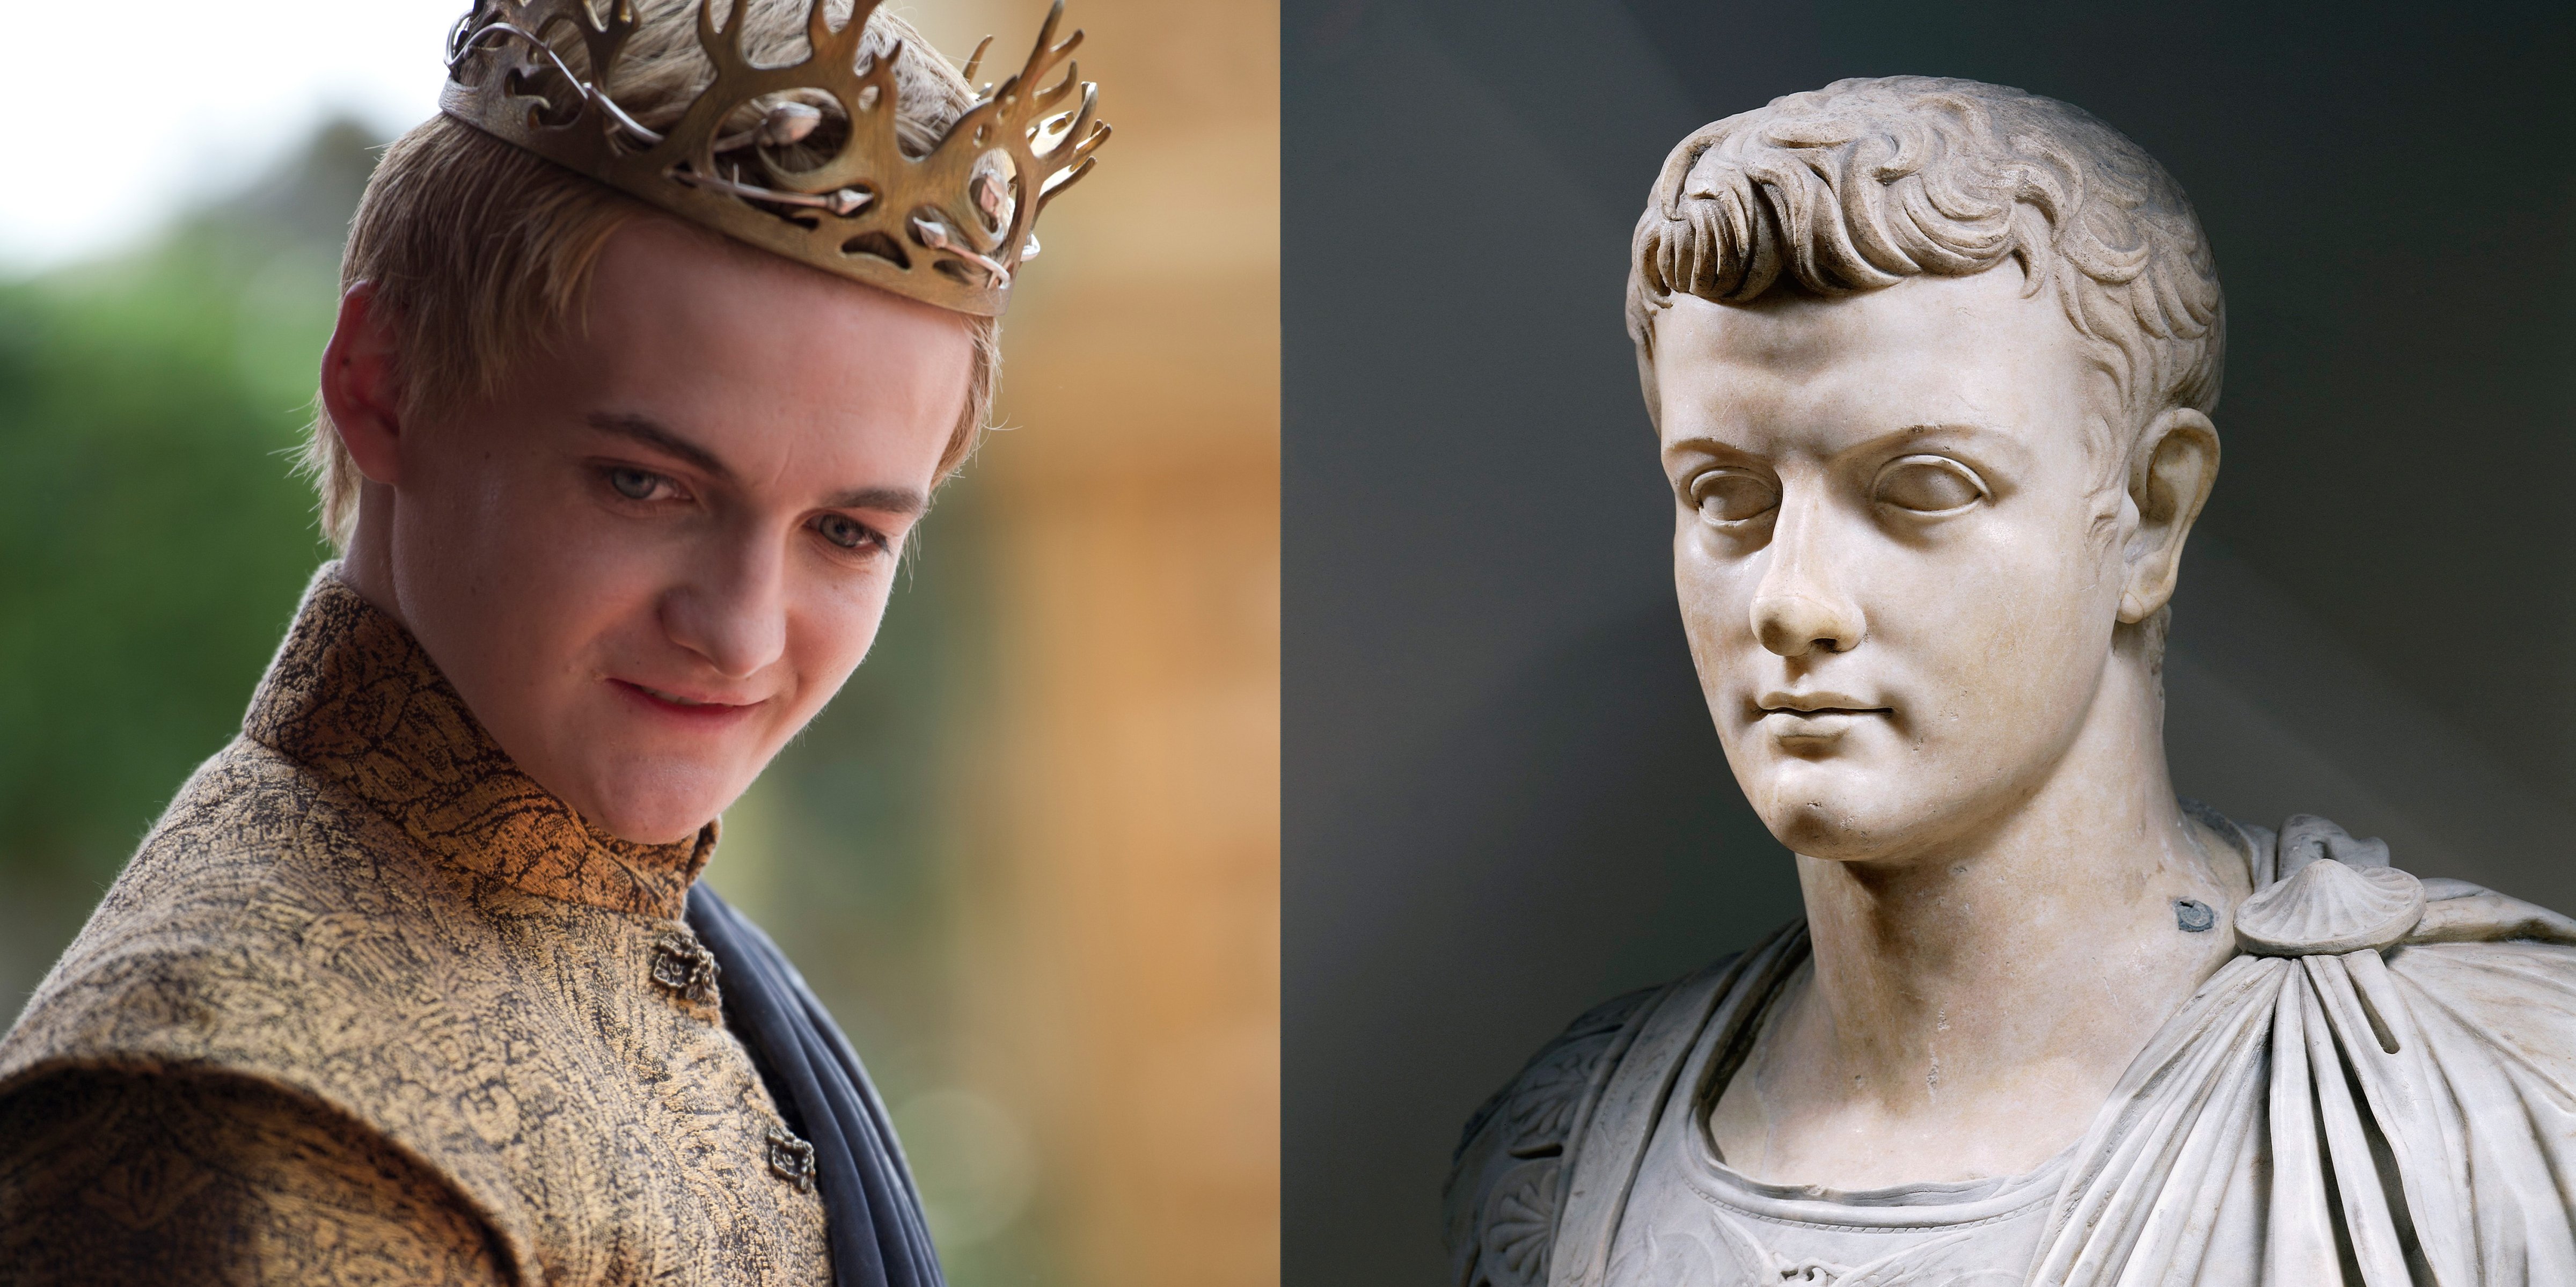 From left: Joffrey and Caligula. (HBO; De Agostini—Getty Images)